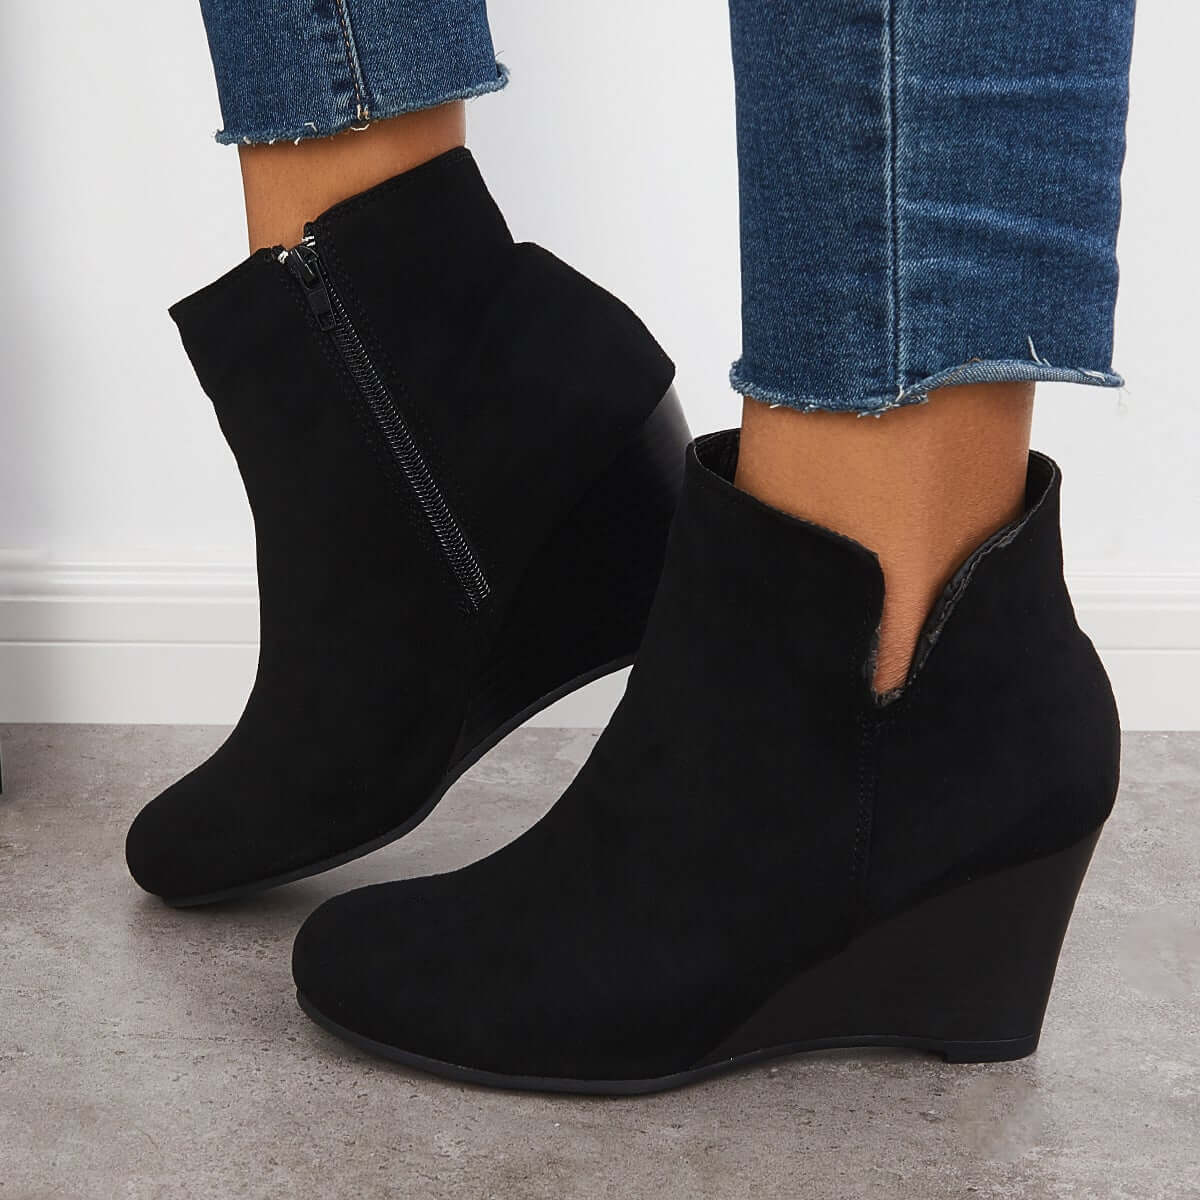 Cutout Ankle Wedge Booties V-cut Stacked Heel Boots – Tinstree